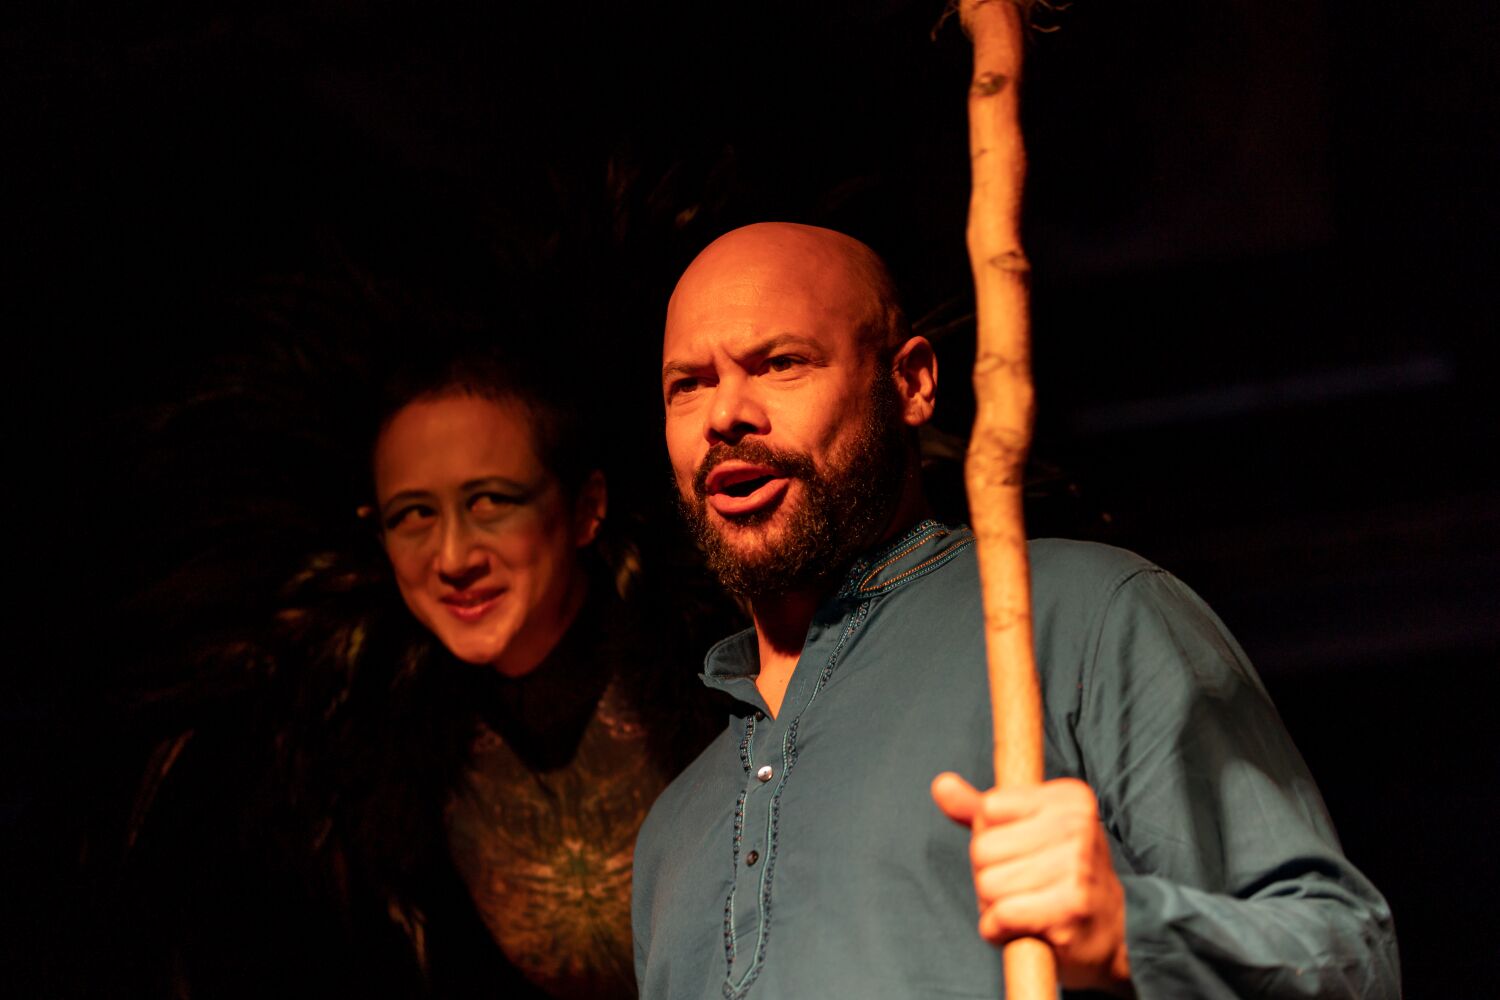 Review: Words aren't the only magic in this interactive production of Shakespeare's 'Tempest'